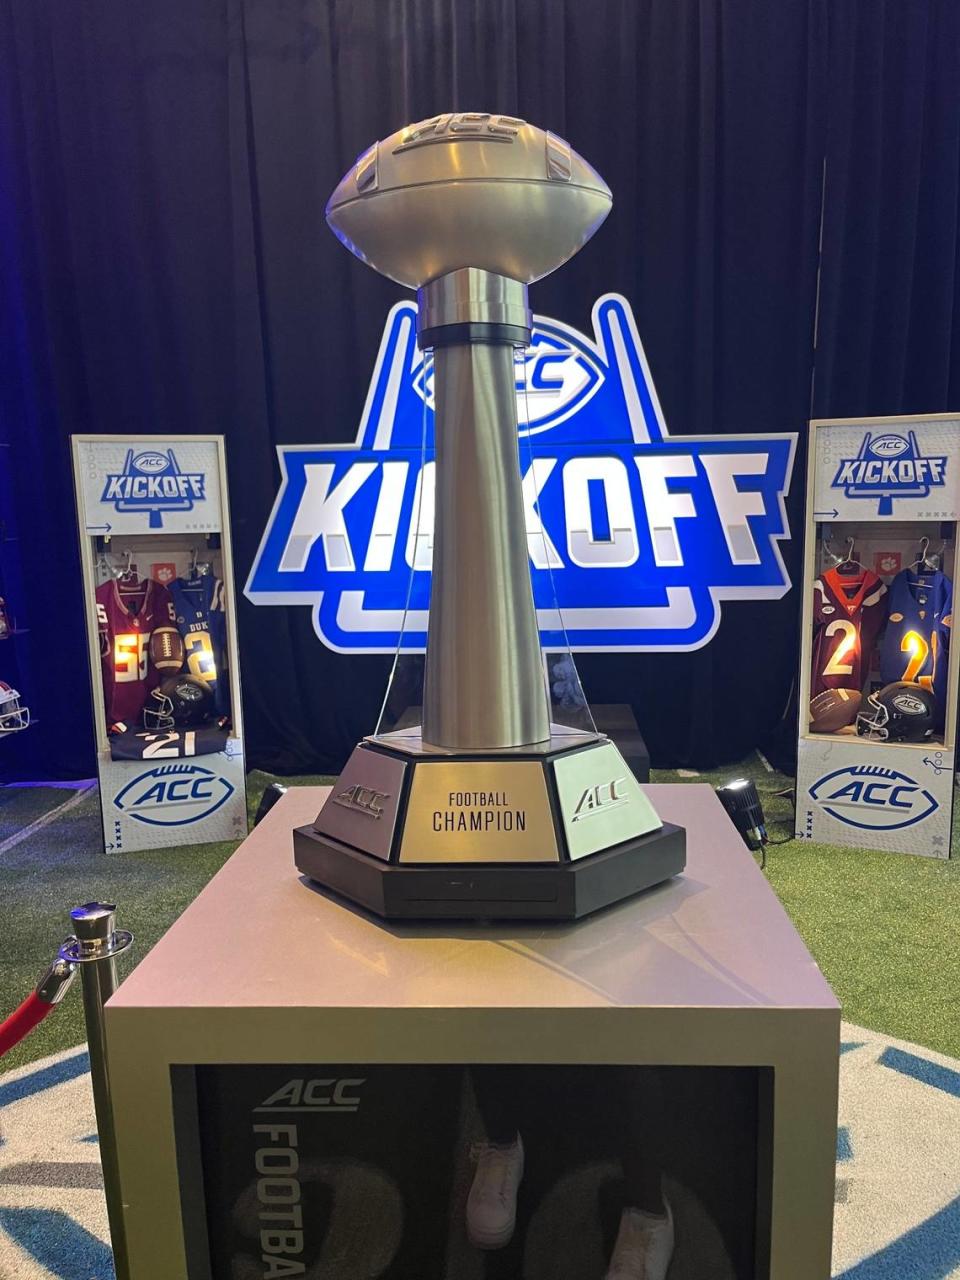 ACC Football Championship trophy on display at the 2023 ACC Kickoff in Charlotte, NC